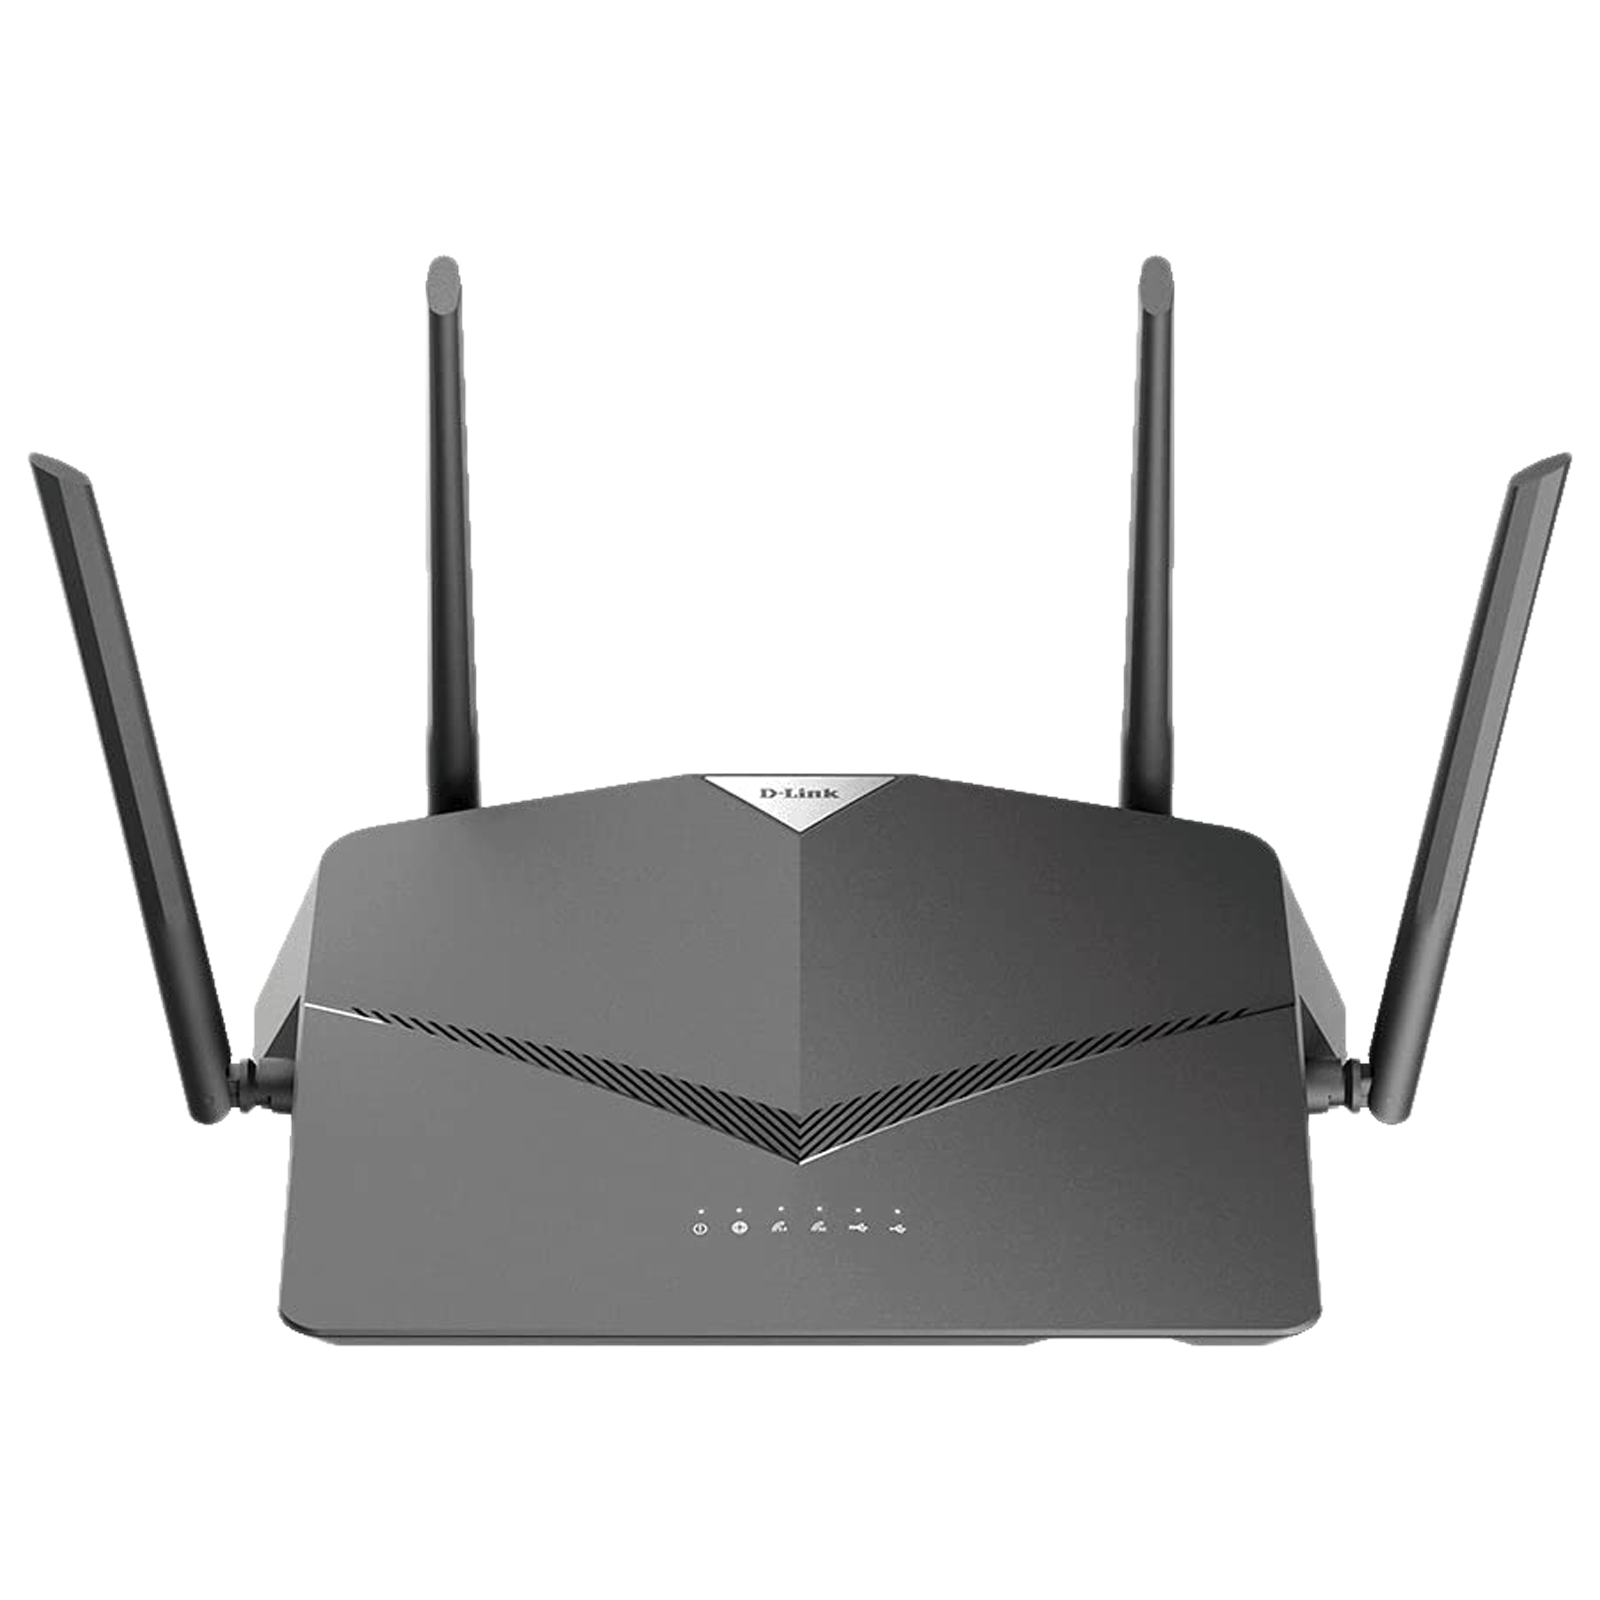 D-Link DIR-2640 Dual Band 2600 Mbps Wi-Fi Router (4 Antennas, 3 LAN Ports, MIMO Supported, Black)